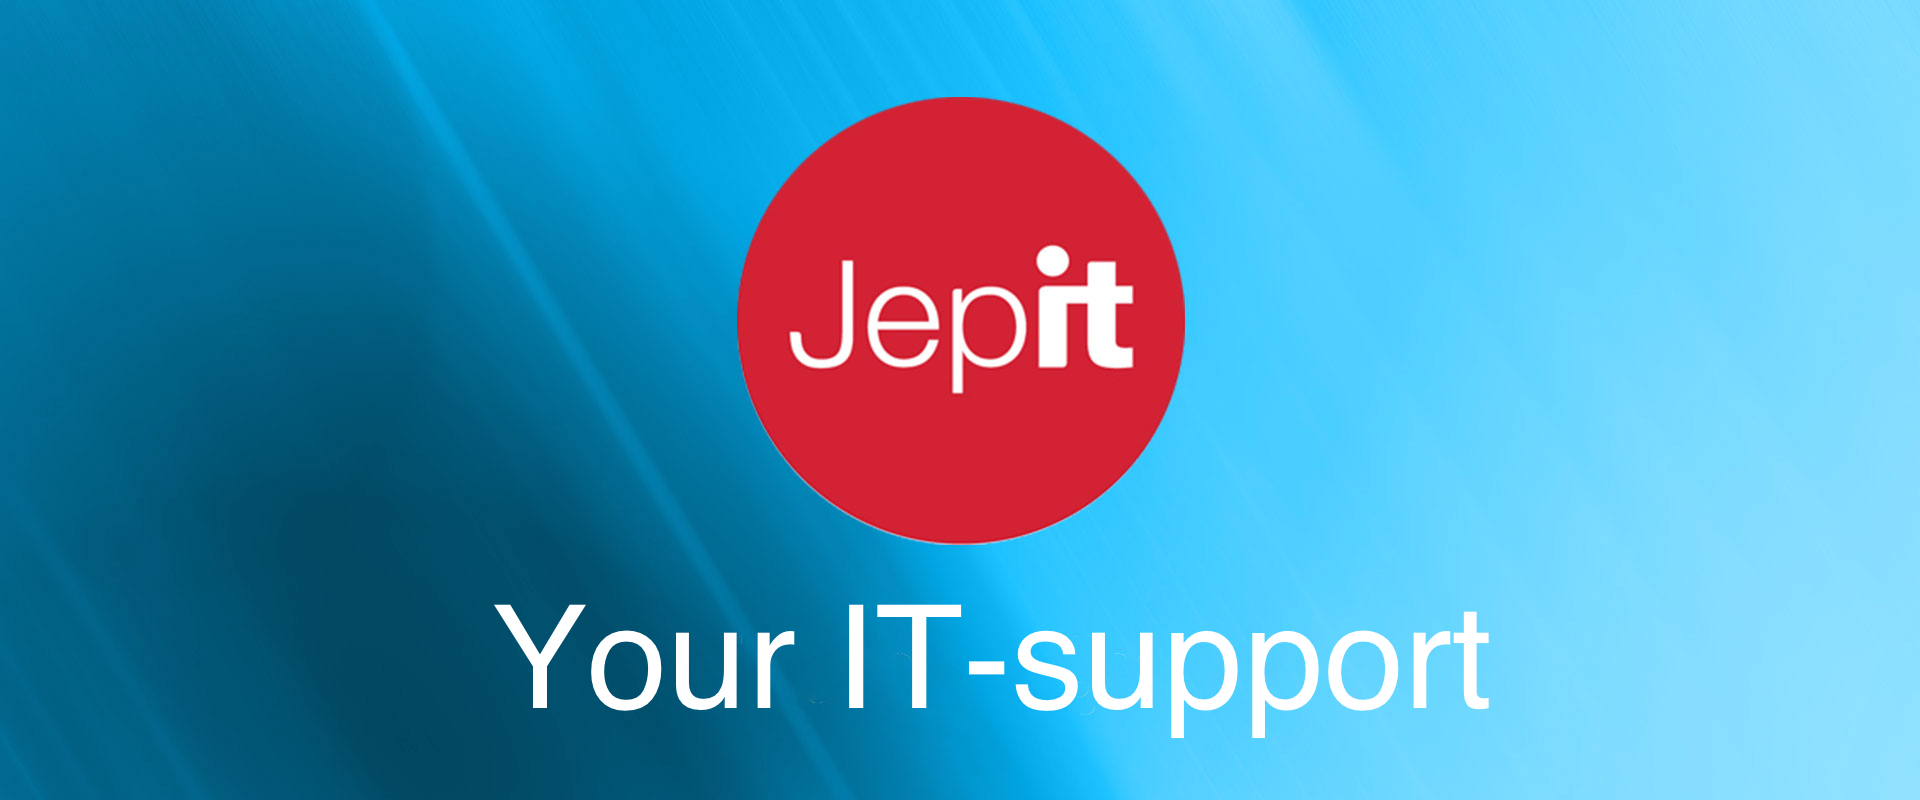 Jepit your it-support